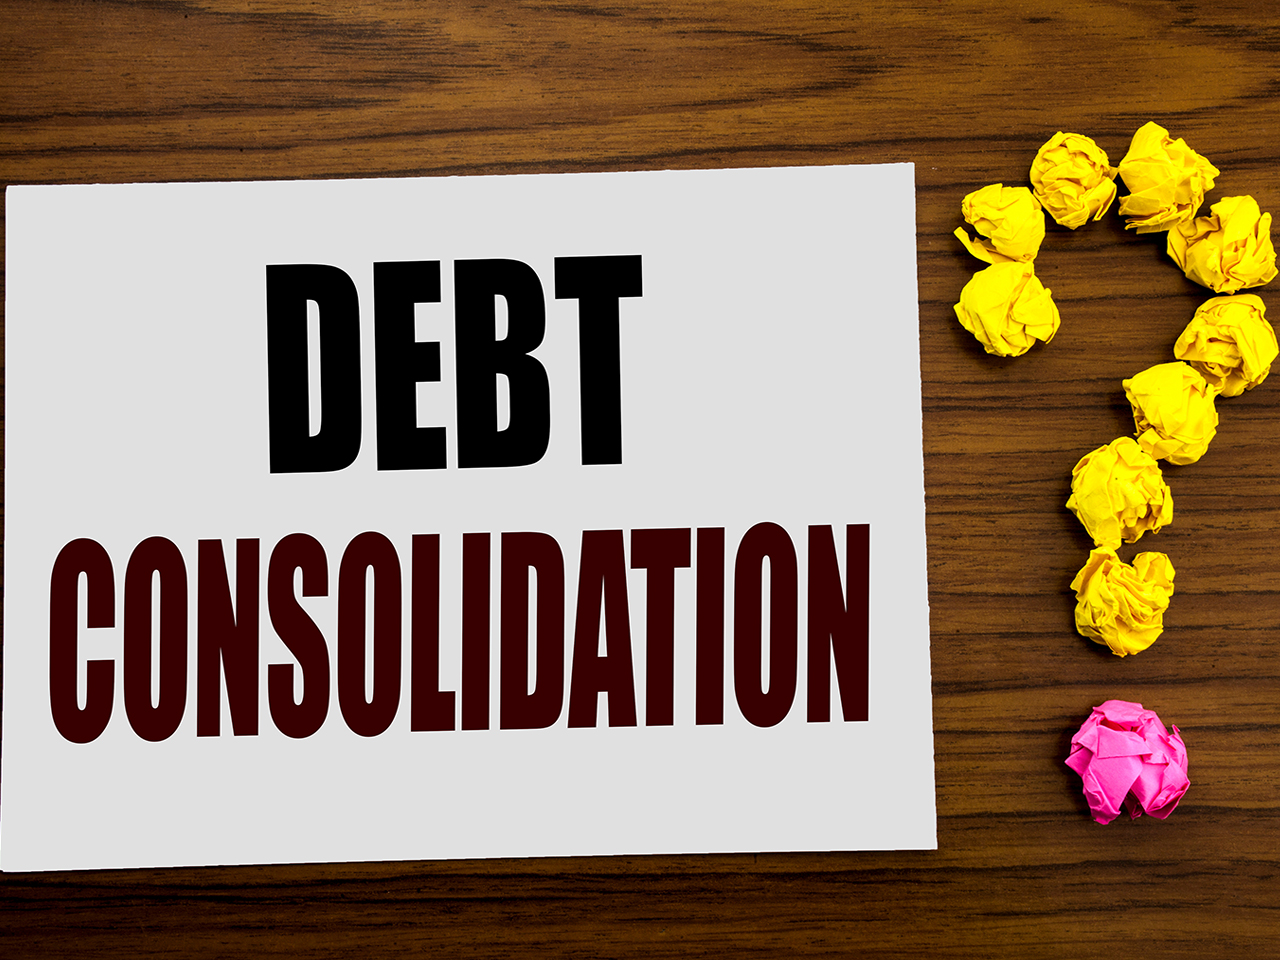 https://apmortgagesolutions.co.uk/wp-content/uploads/2021/08/debt-consolidation-image2.jpg